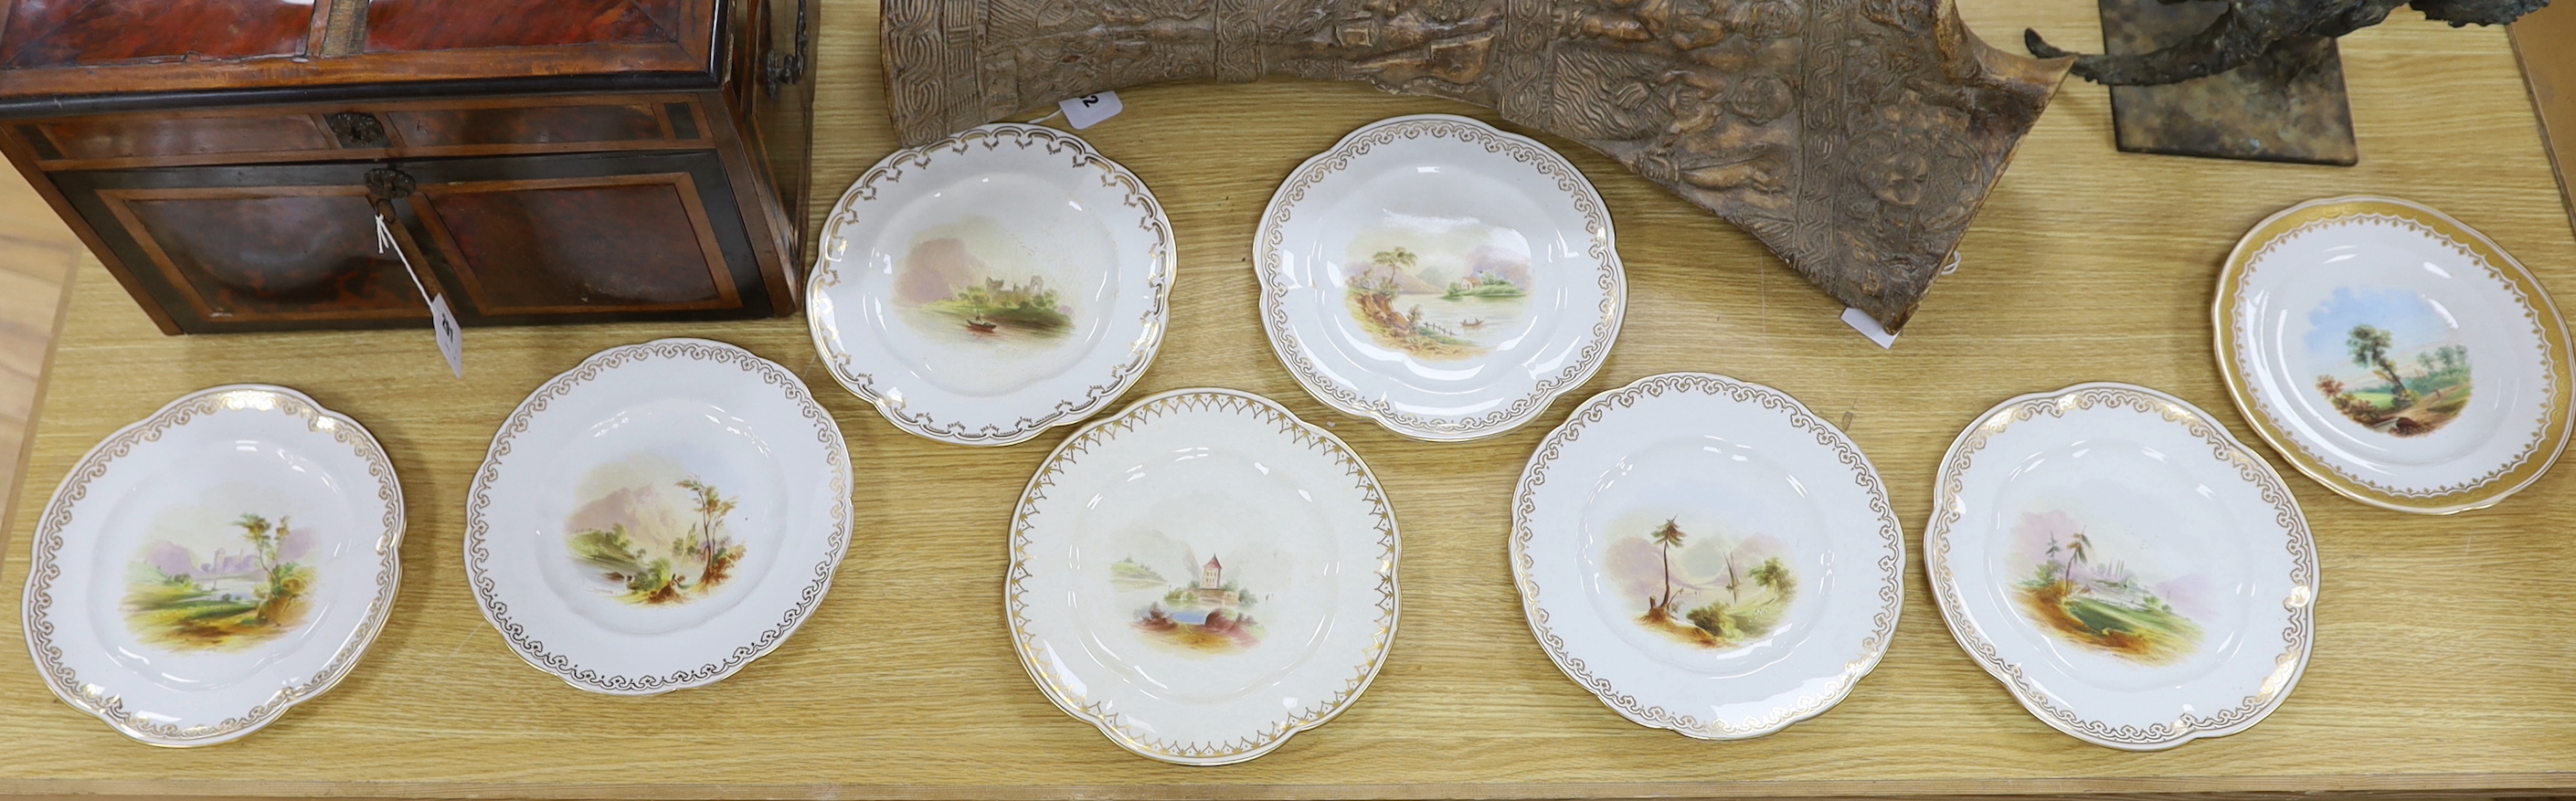 Eight mid-19th century decorative plates, painted with landscapes, probably Coalport, the largest